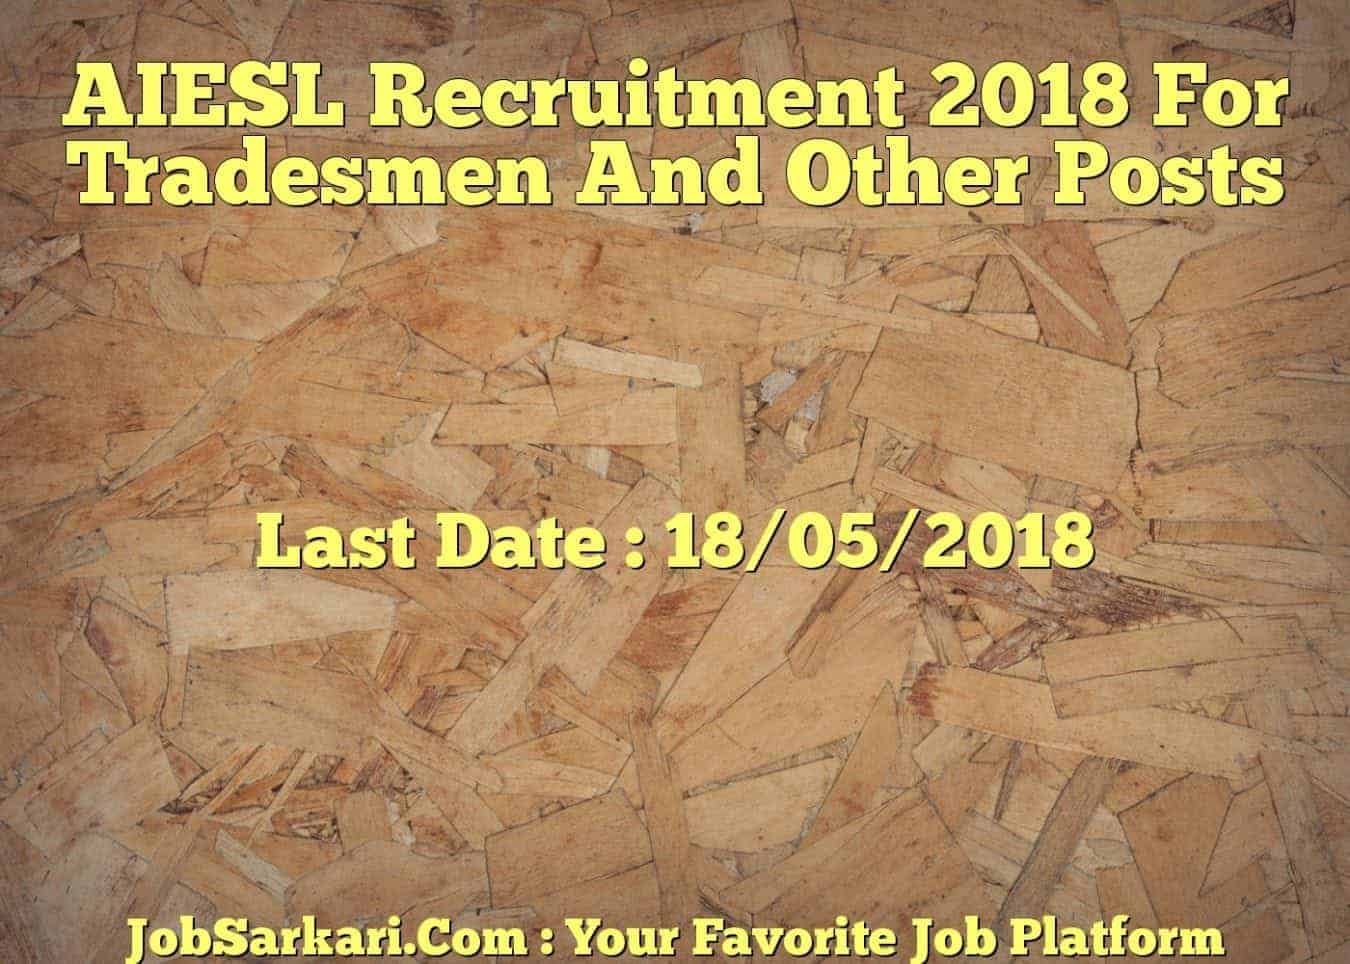 AIESL Recruitment 2018 For Tradesmen And Other Posts